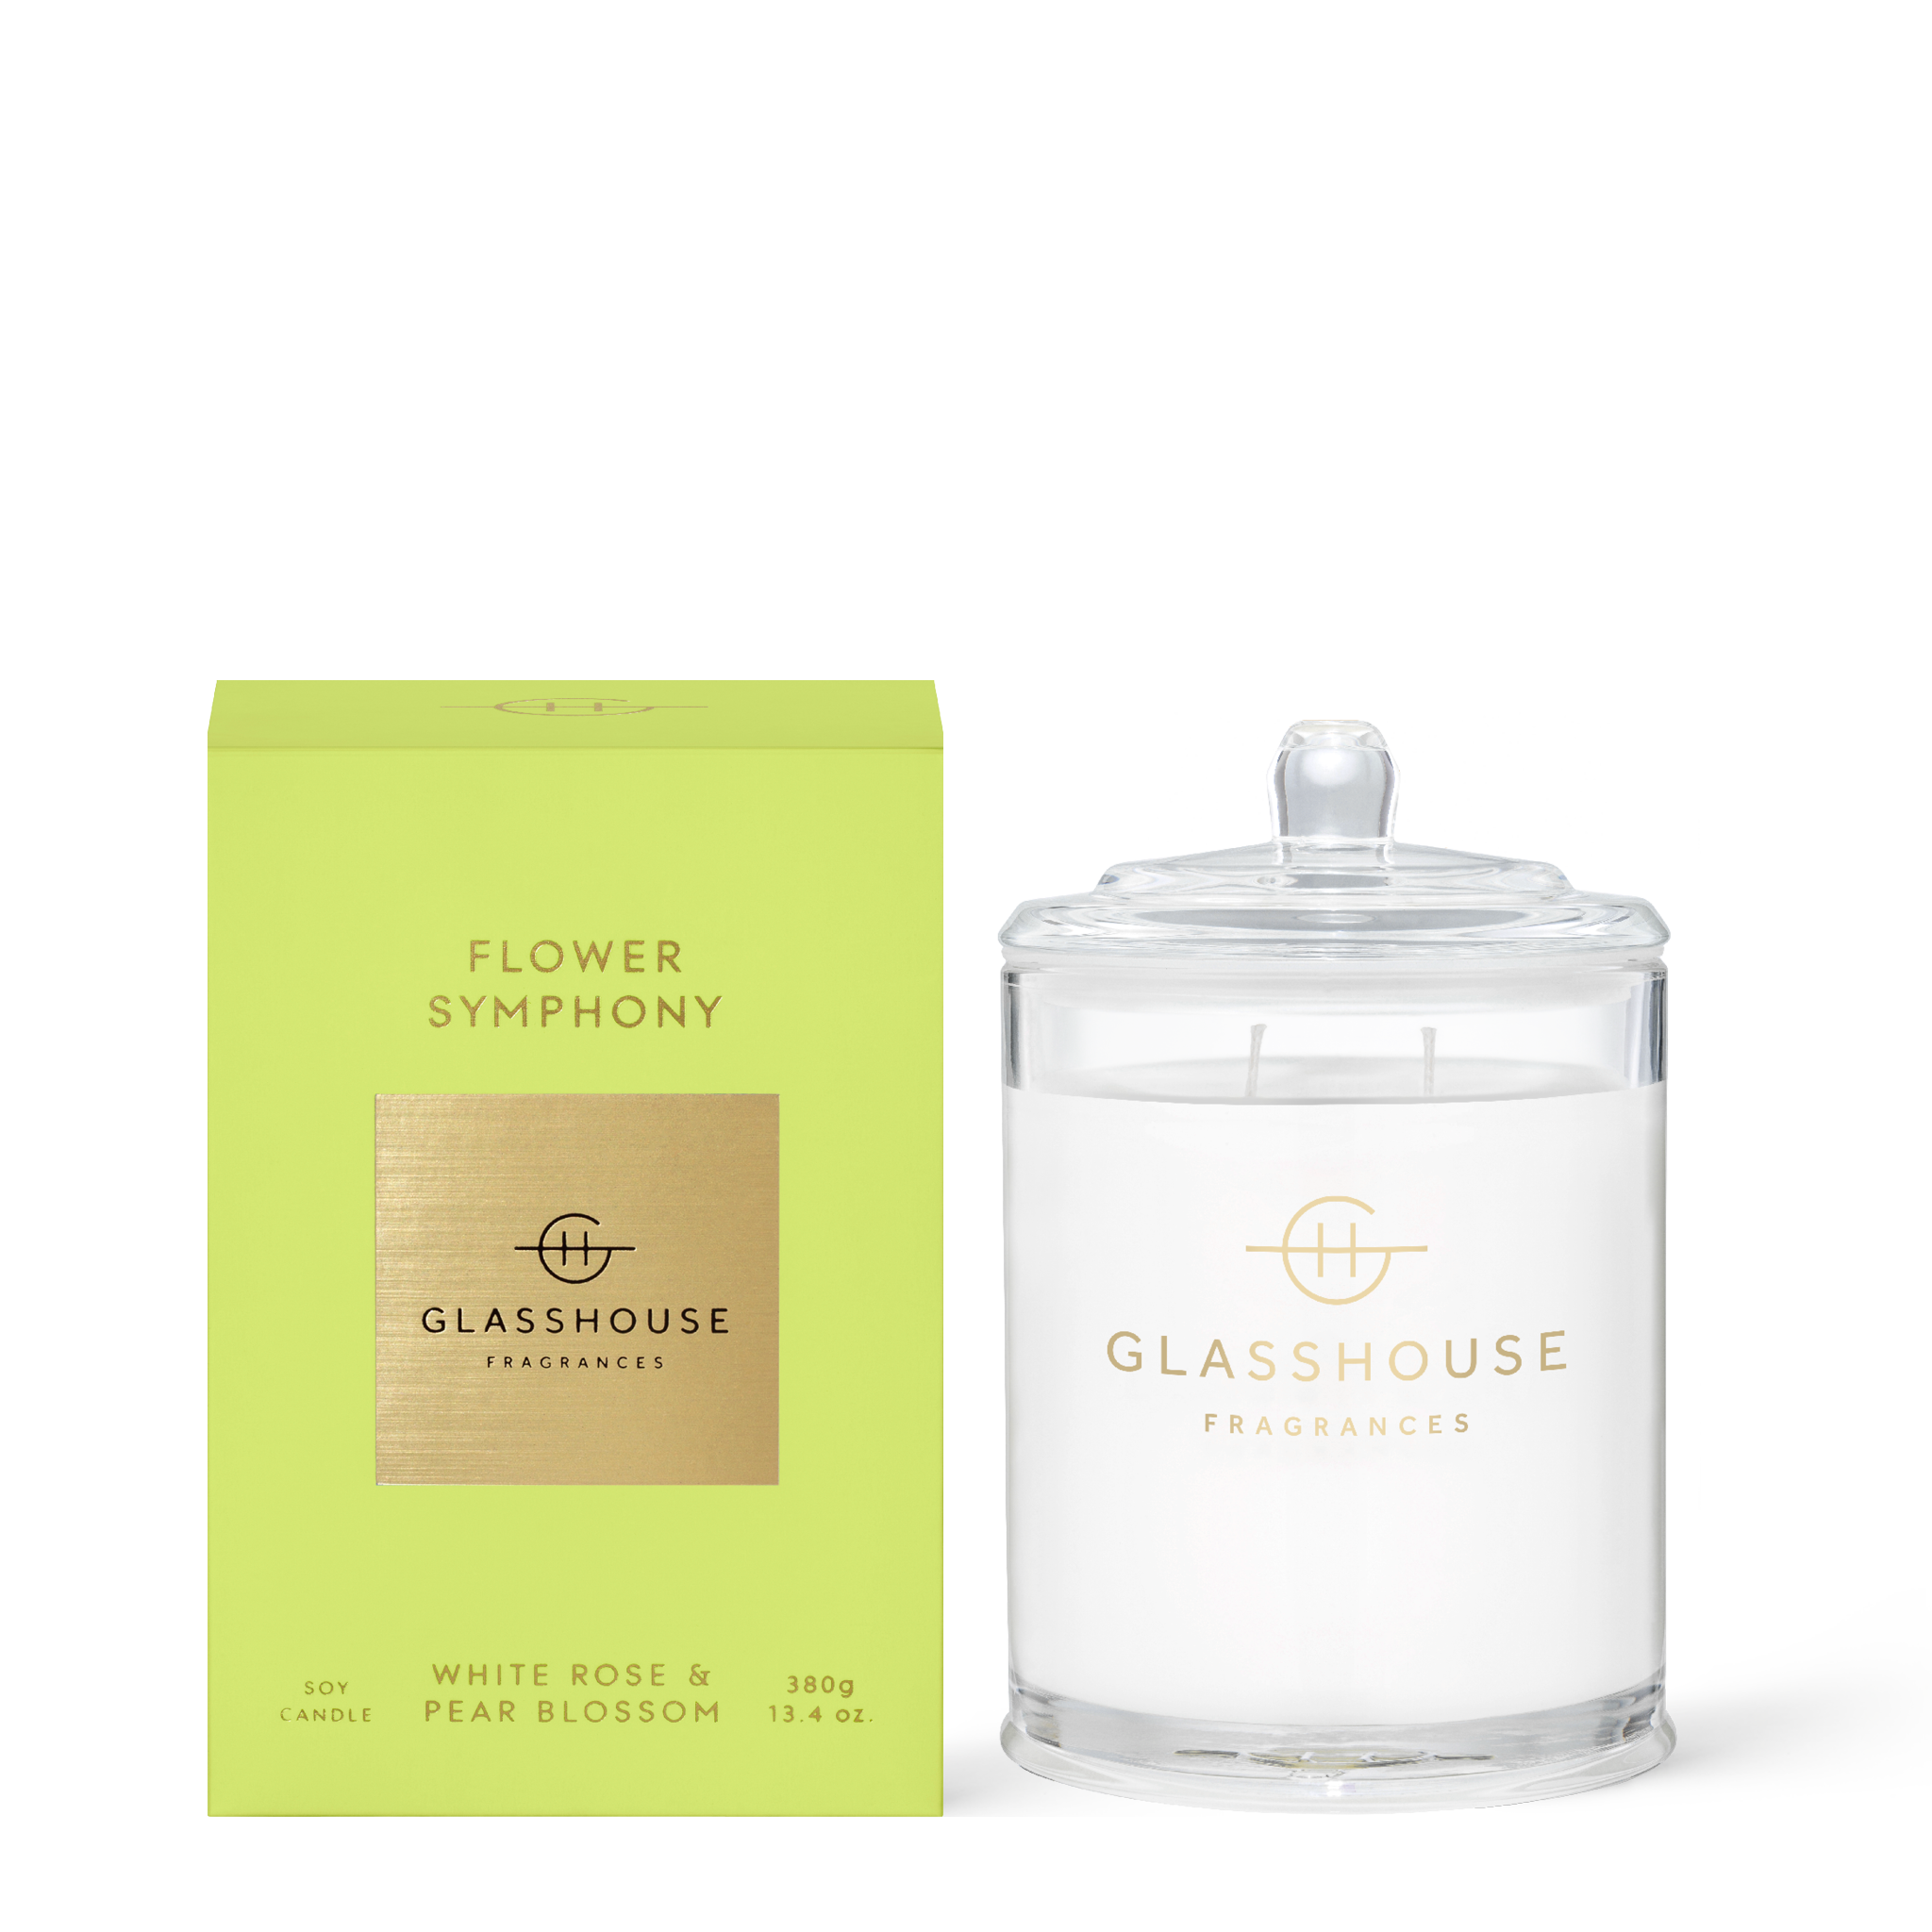 Glasshouse Fragrances Flower Symphony White Rose and Pear Blossom 380g Soy Candle with box